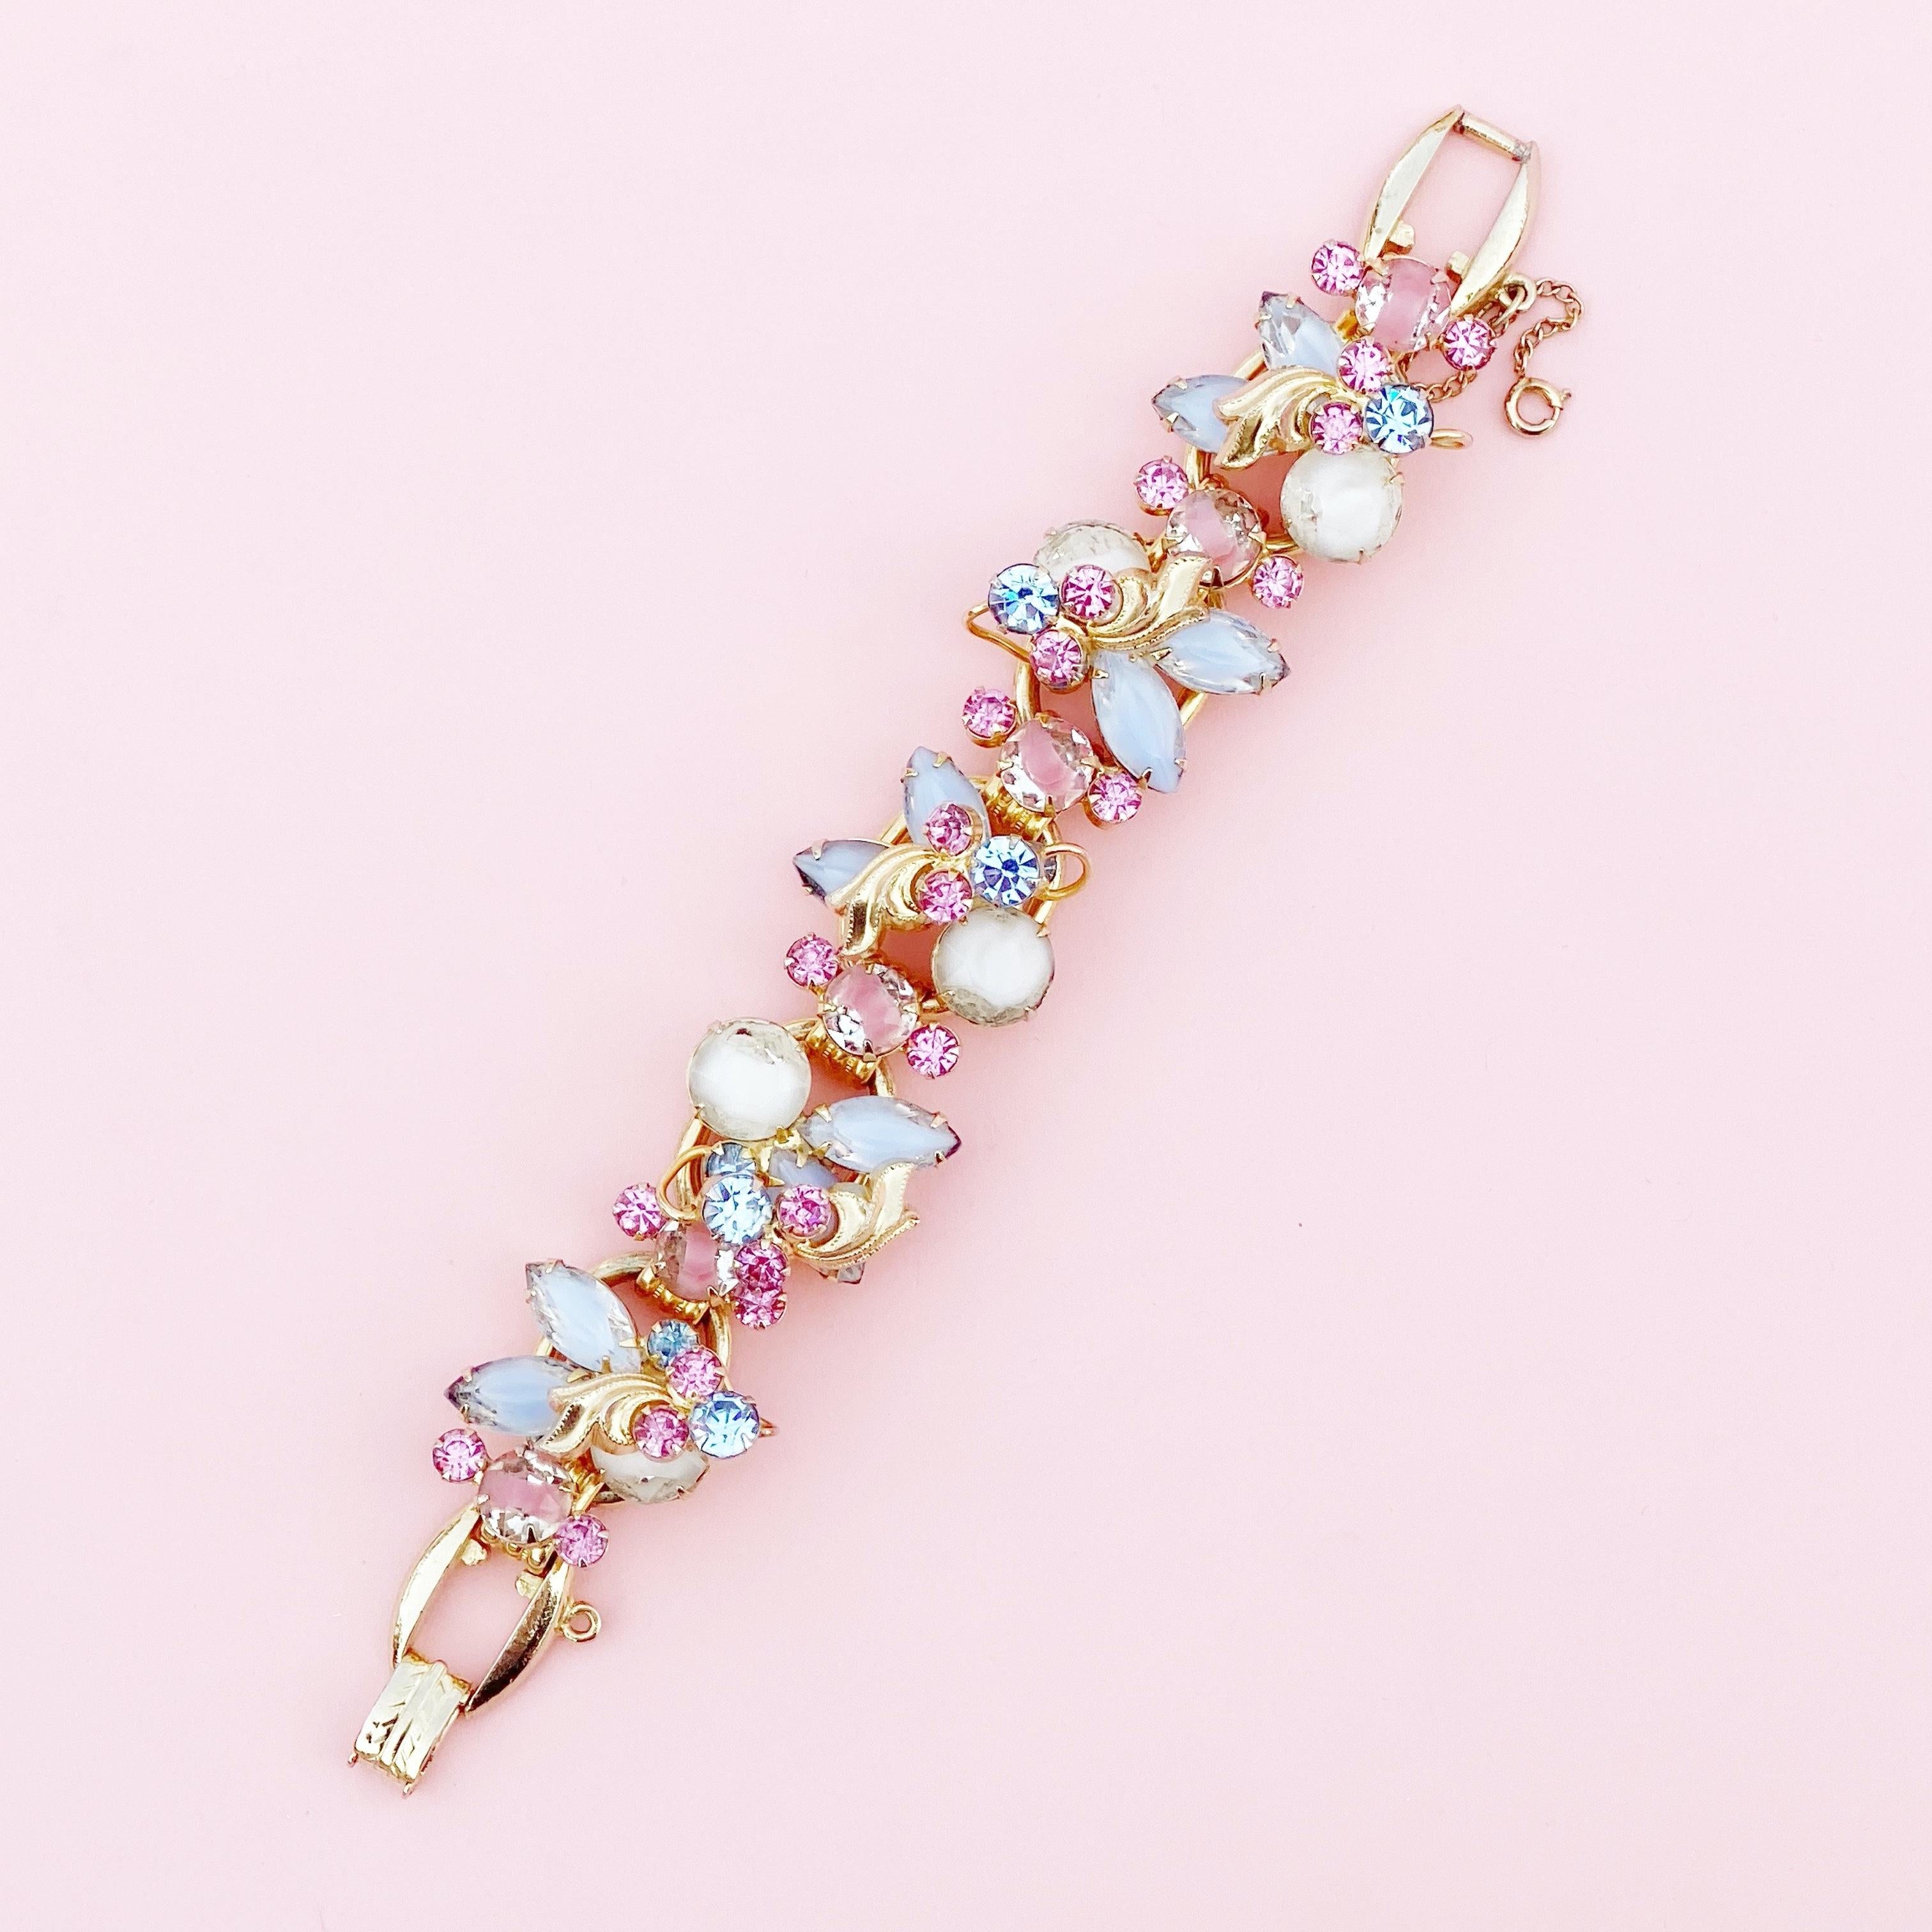 Pastel Pink & Blue Givre Glass & Rhinestone Juliana Bracelet By DeLizza & Elster In Excellent Condition For Sale In McKinney, TX